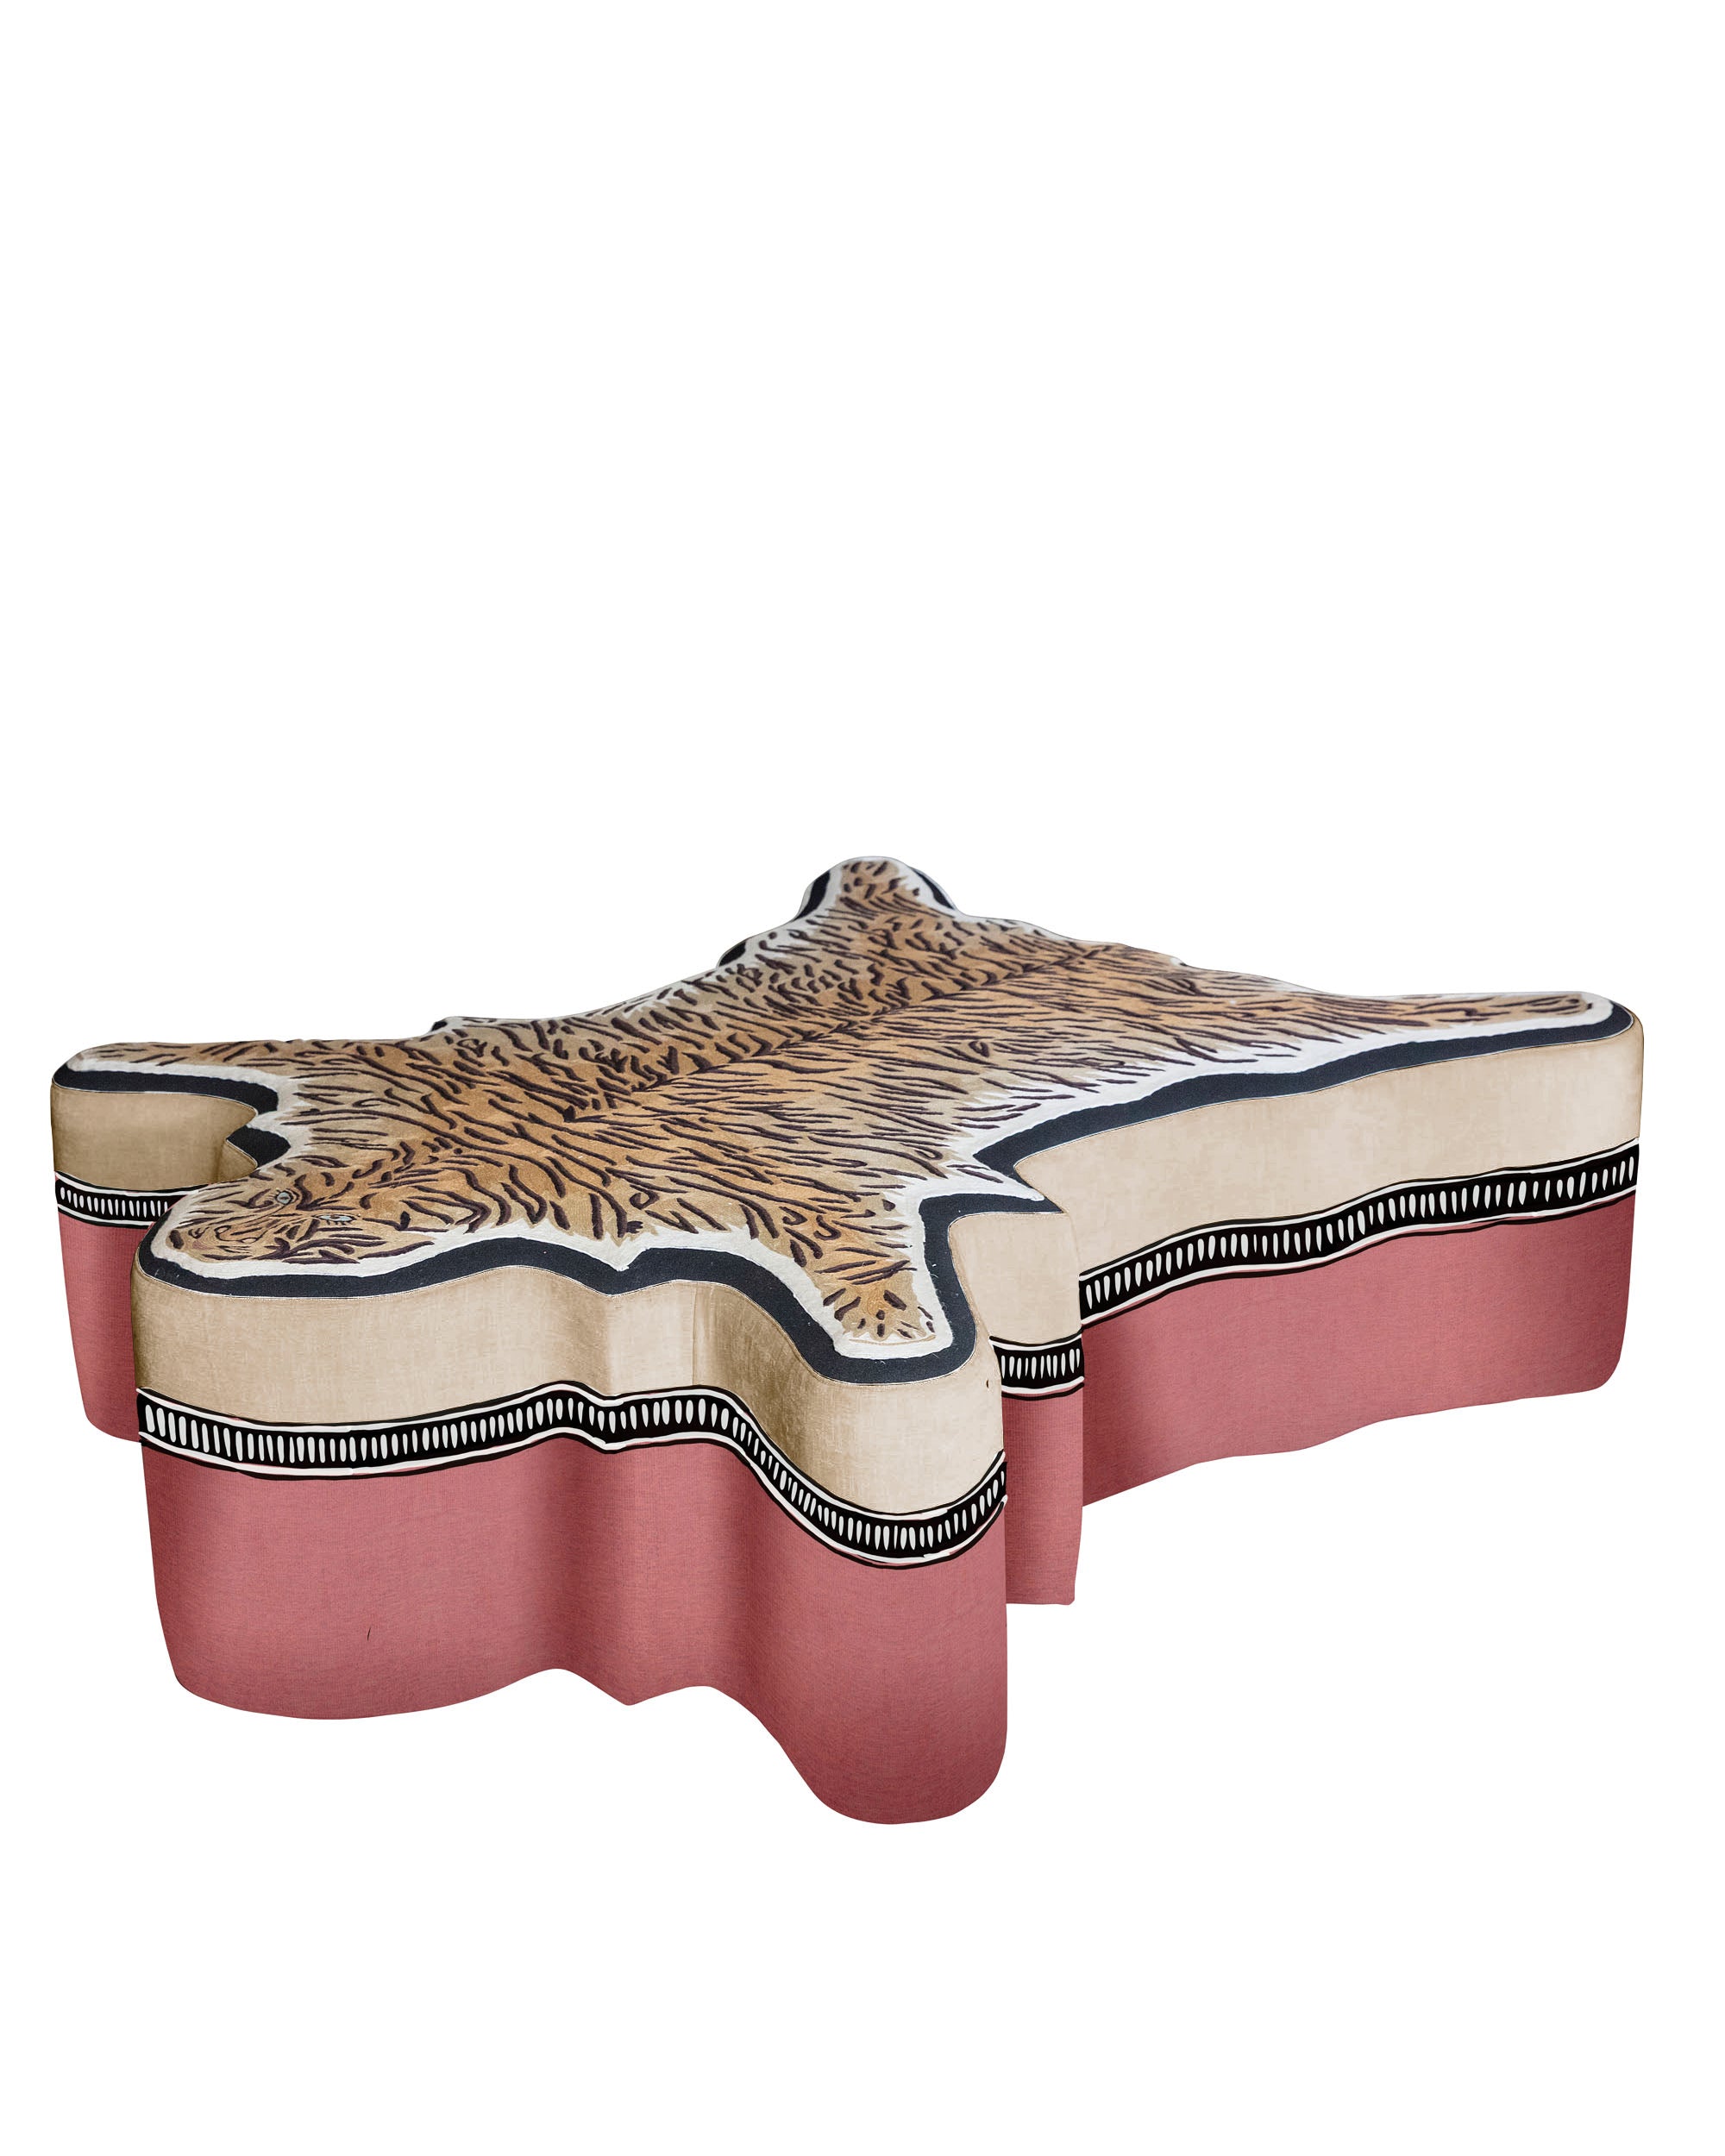  Upholstered ottoman with a leopard’s pelt embroidered in wool 100% (Dusty Rose)